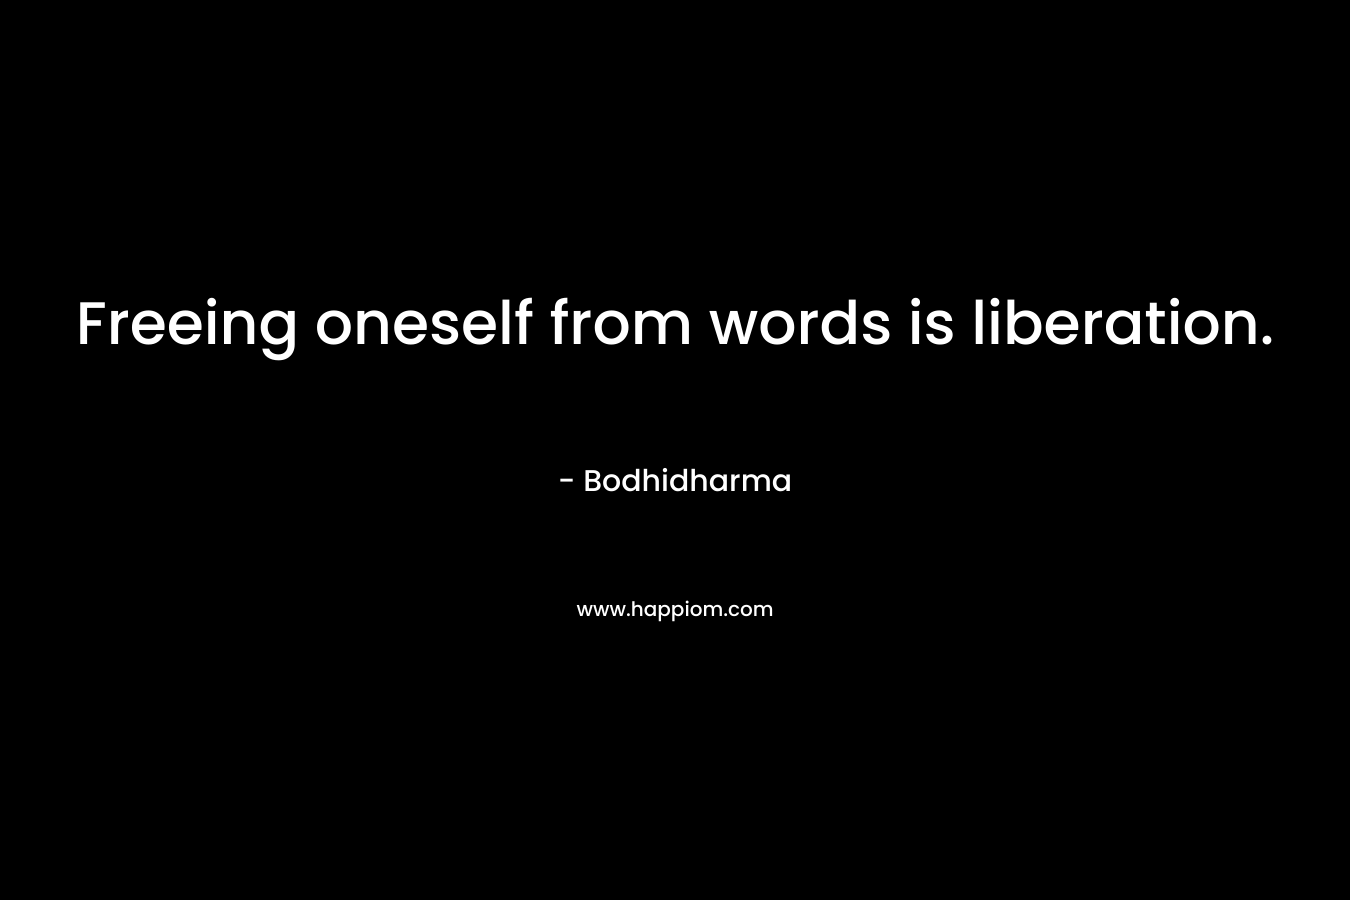 Freeing oneself from words is liberation. – Bodhidharma